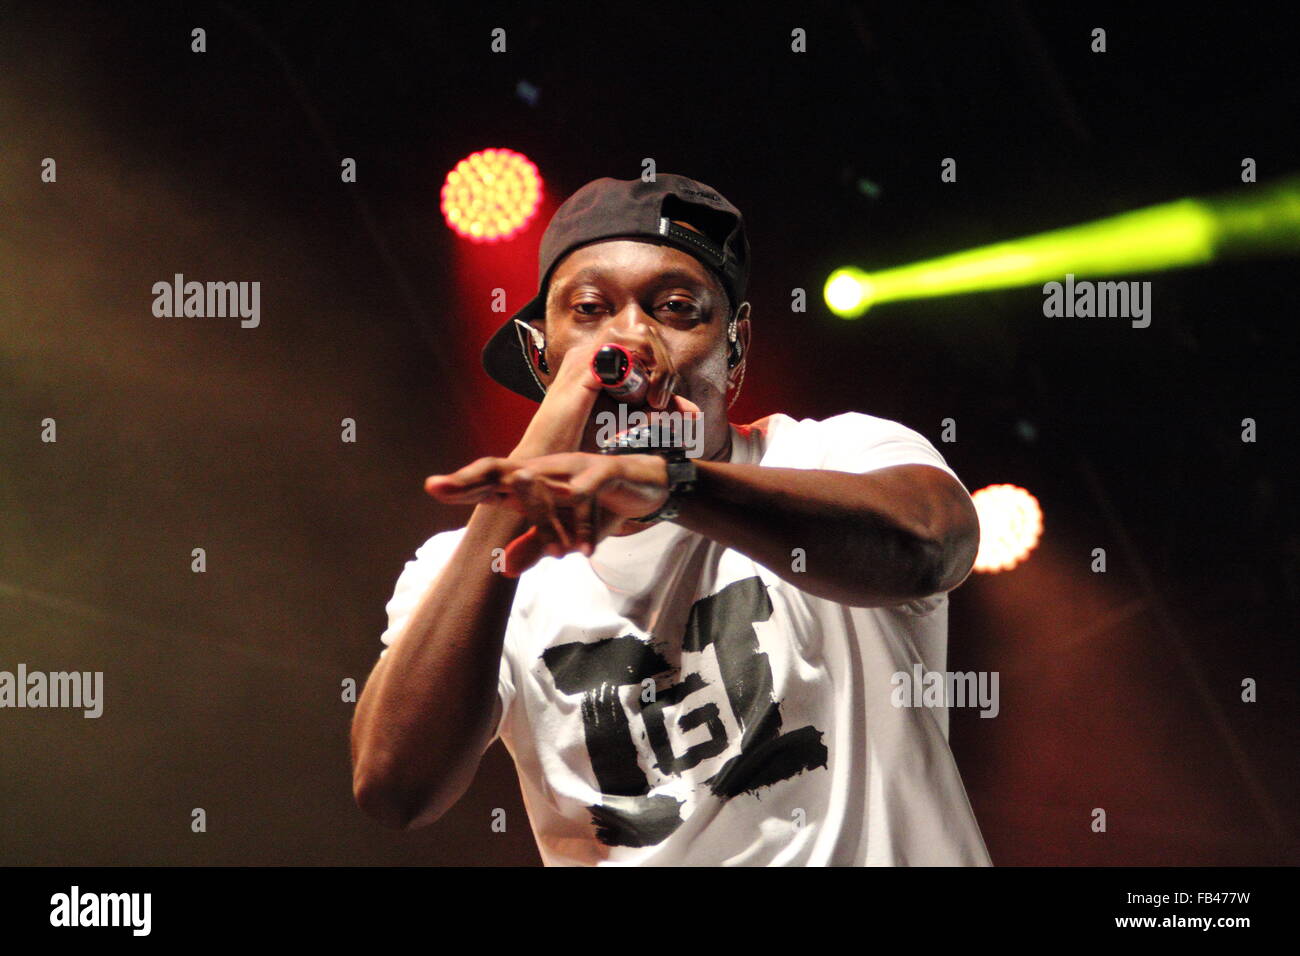 English rapper, Dizzee Rascal  performs on stage at the Y Not music festival in the Peak District National Park, England UK Stock Photo